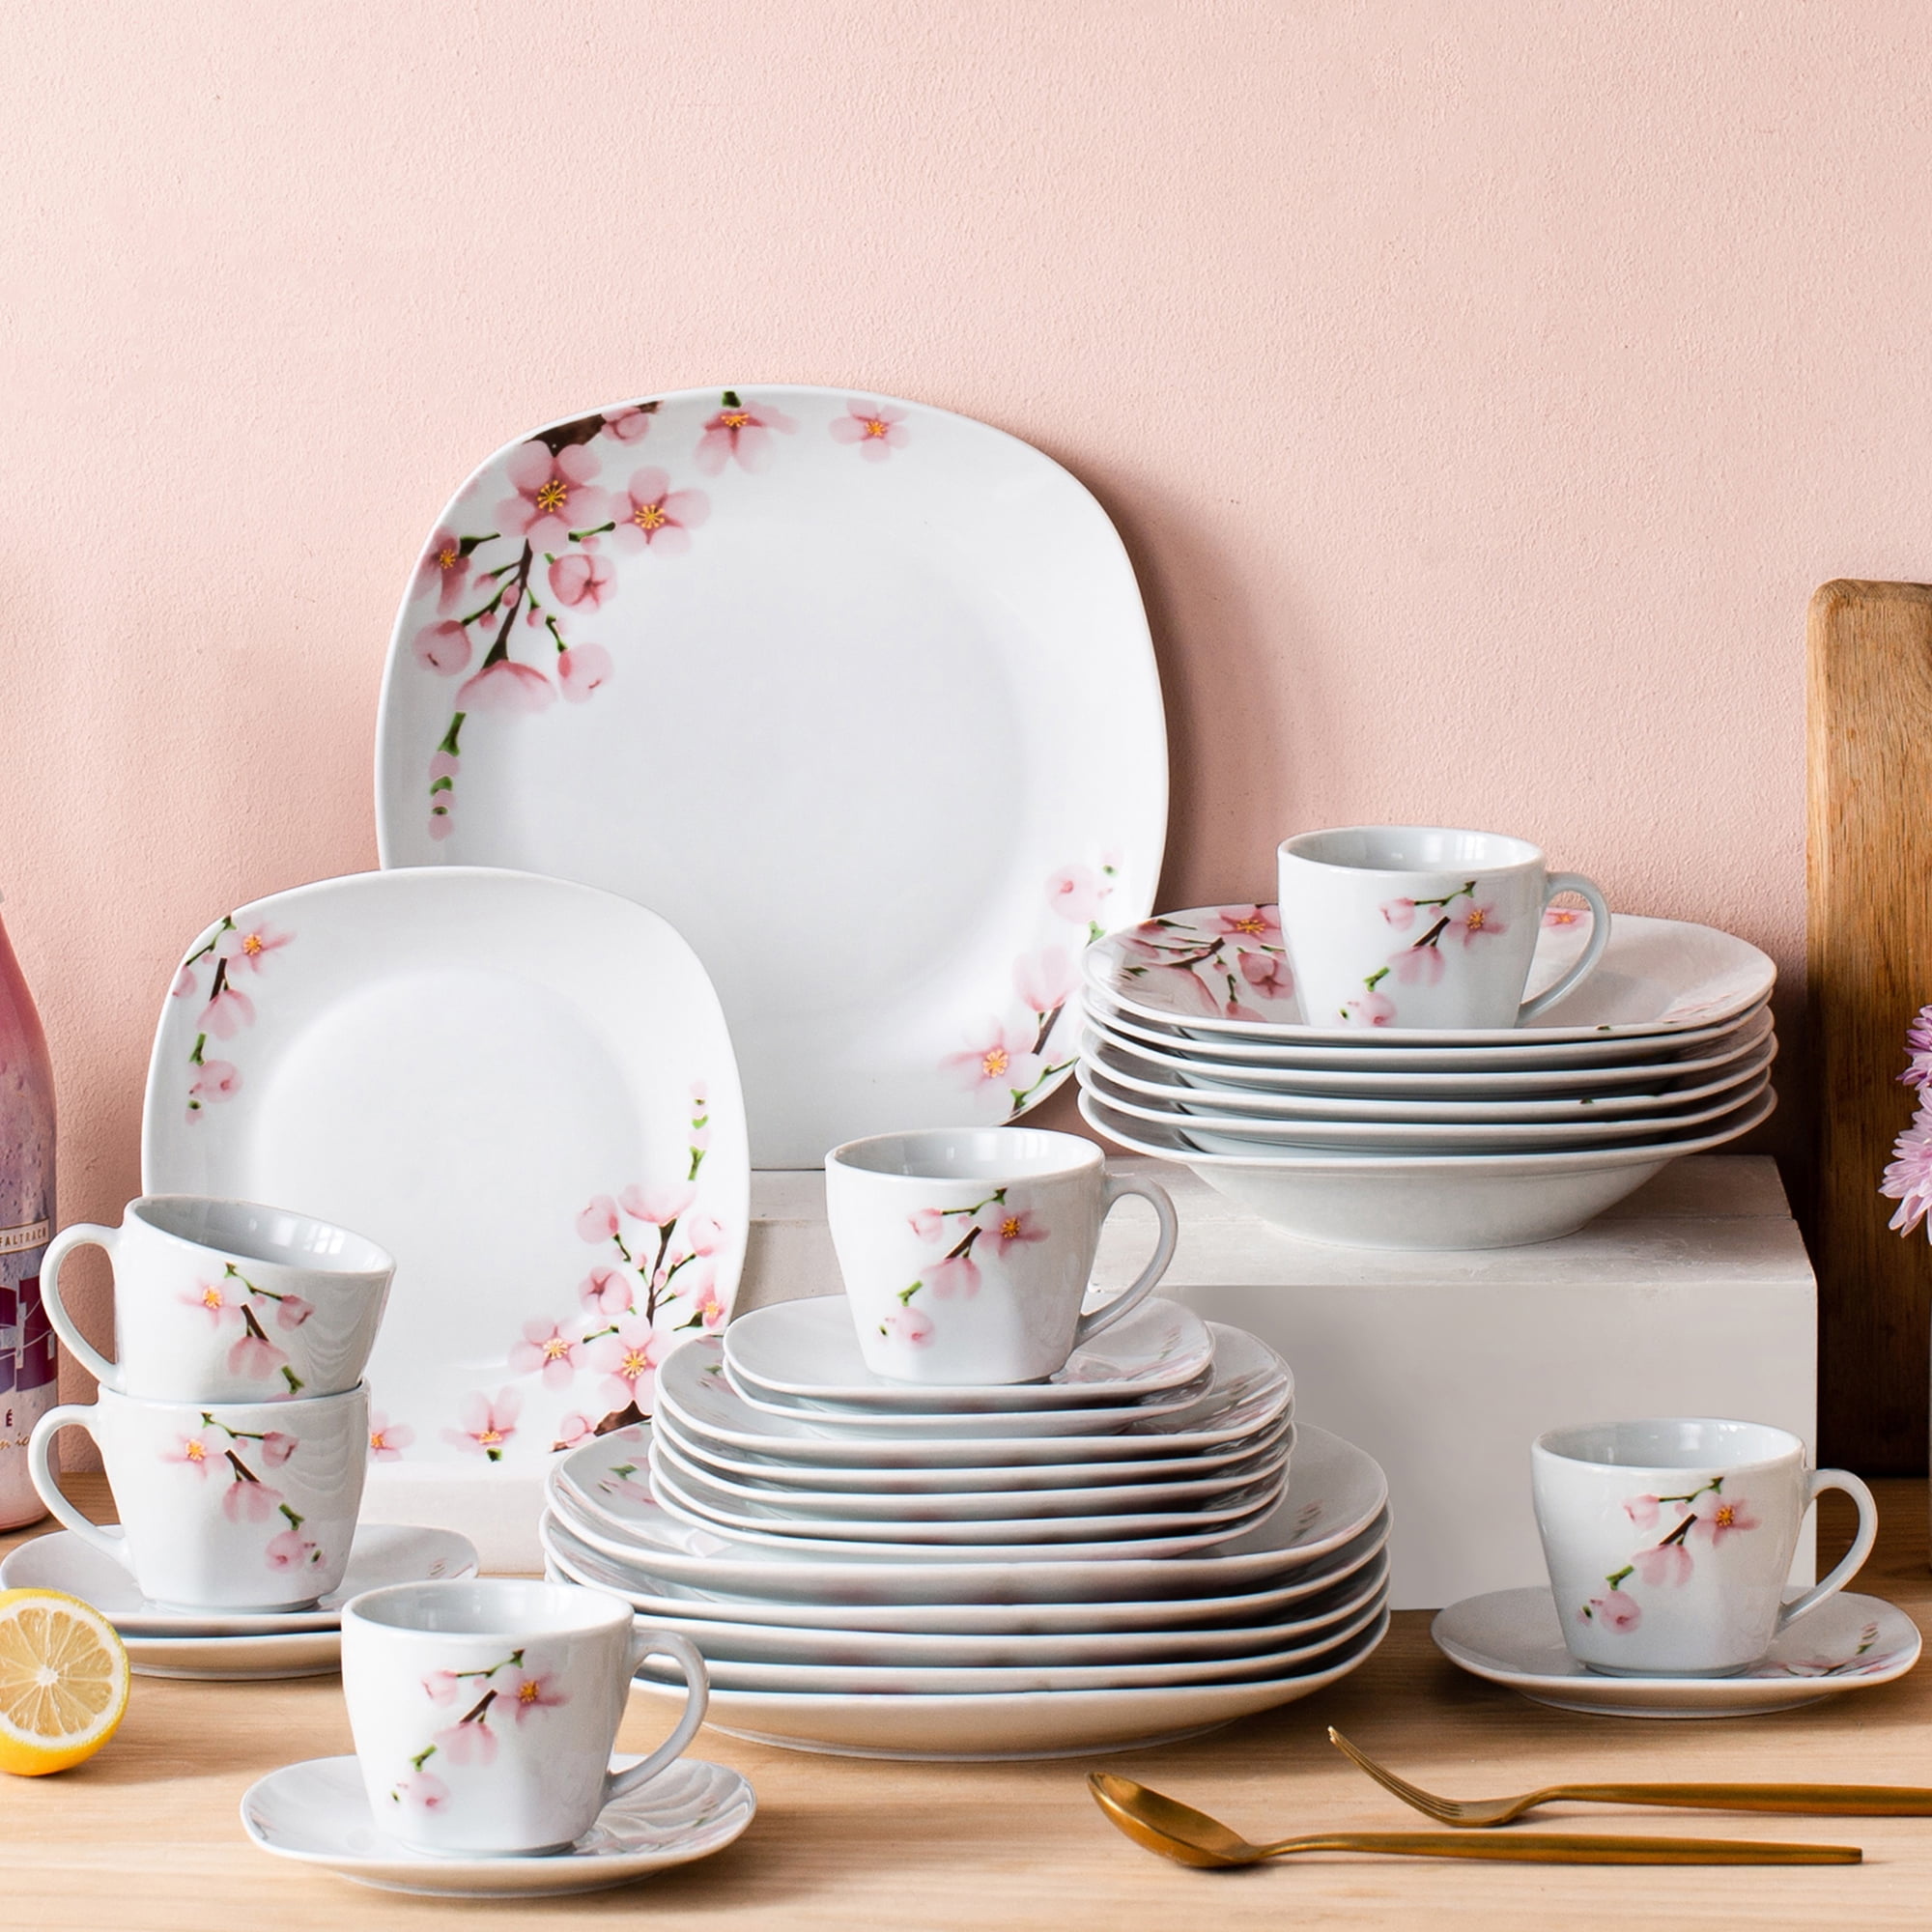 Details about   VEWEET 30-Piece Porcelain Dinnerware Set White Dinner Plates Mugs Service for 6 